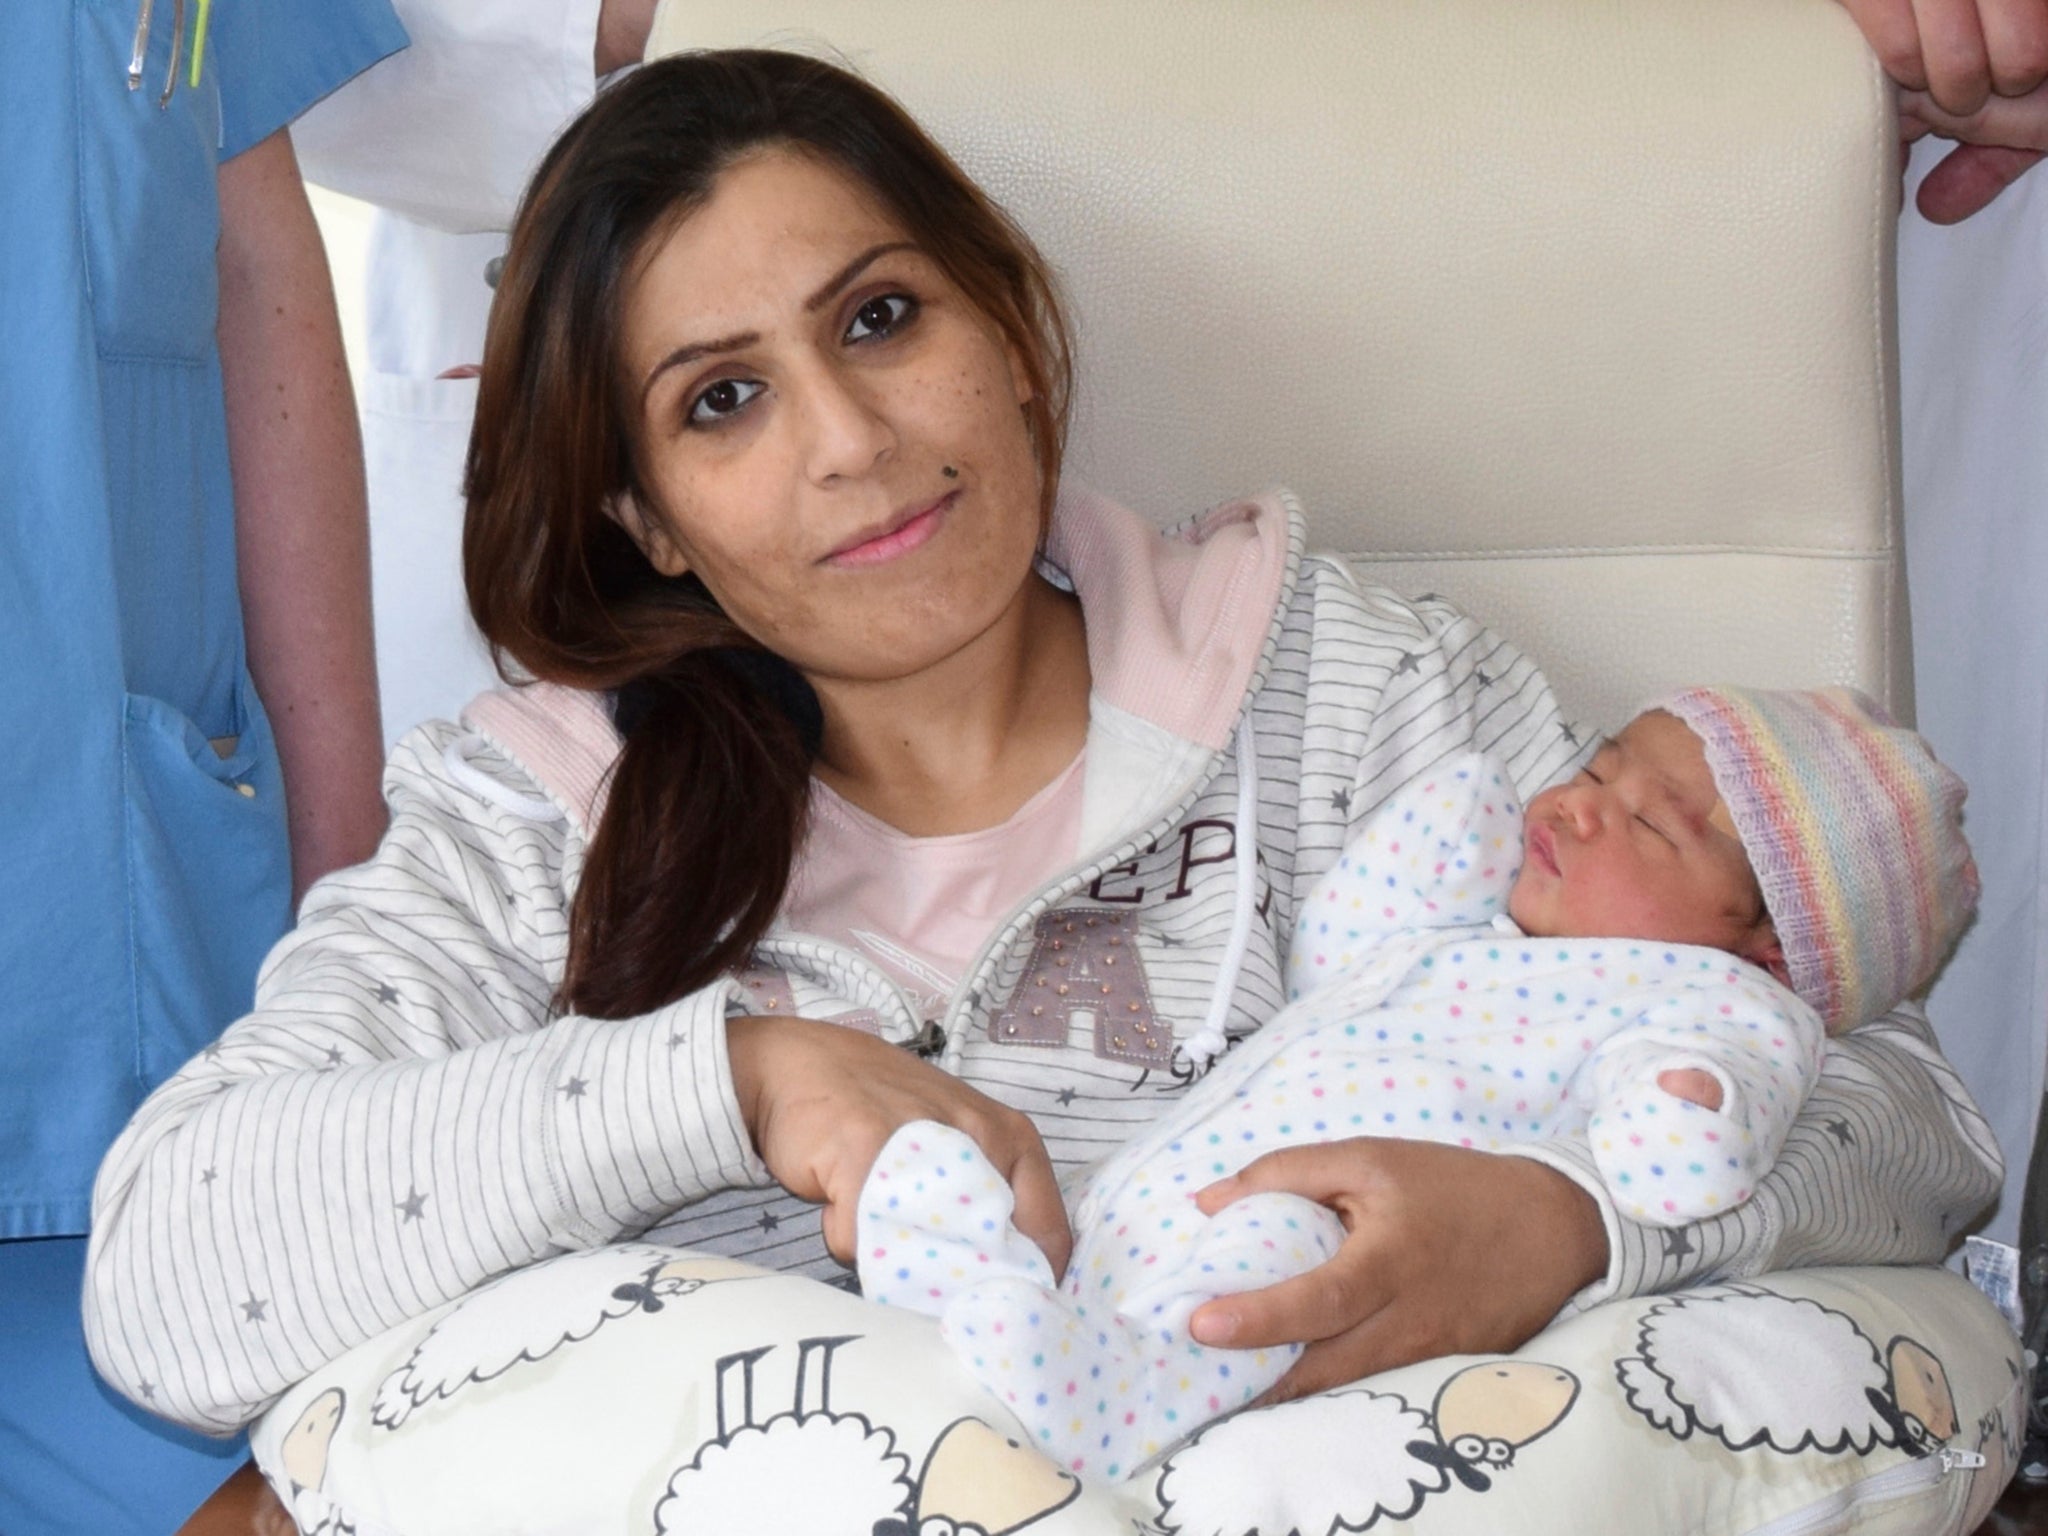 Asia Faray from Syria poses with her daughter Angela Merkel Muhammed at the St. Franziskus Hospital in Muenster